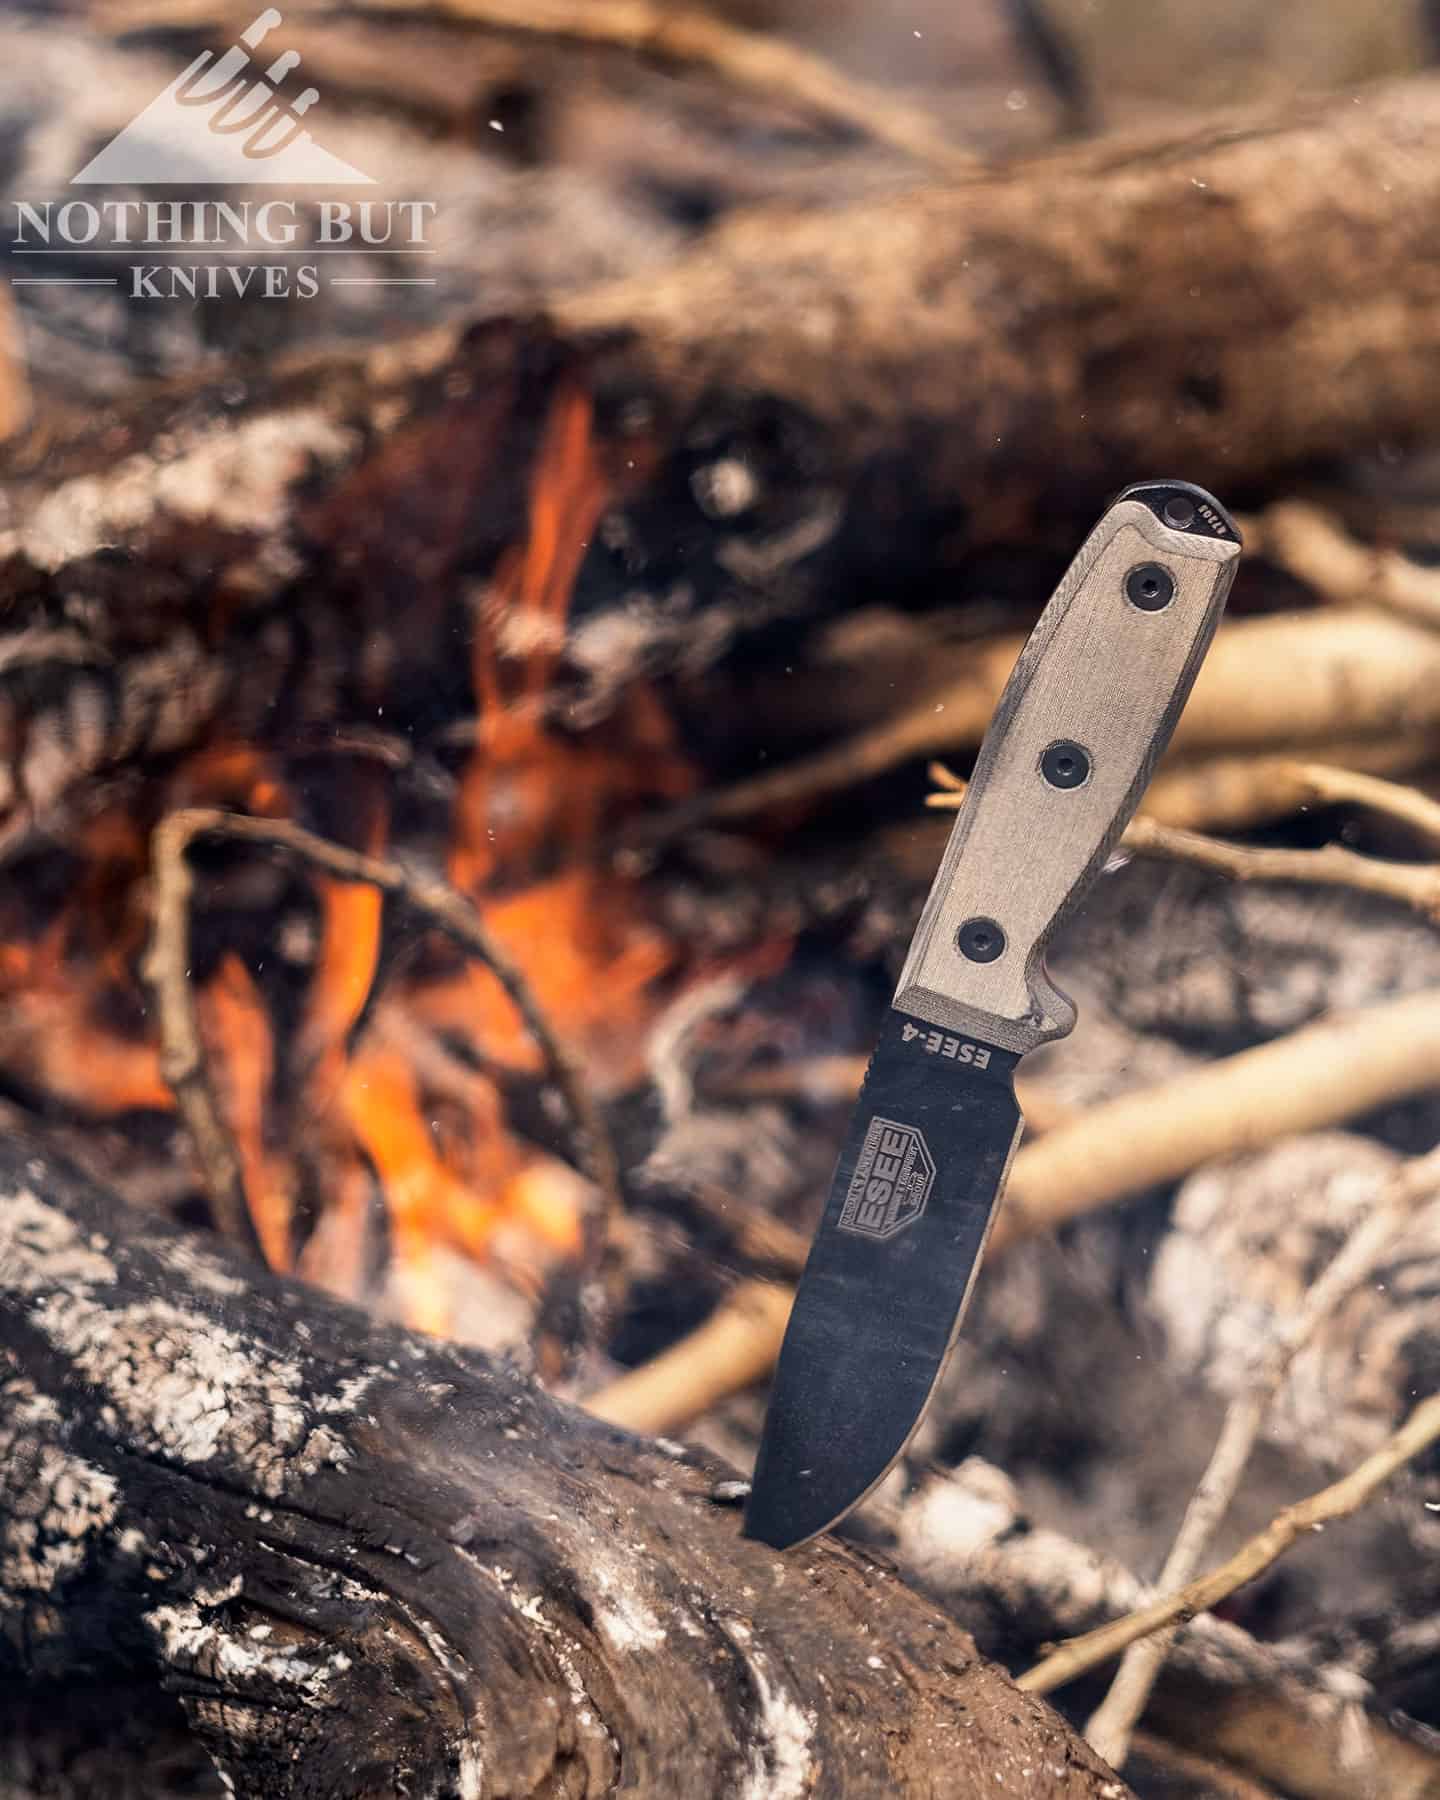 The Esee 4 next to a campfire to illustrate its ability to cover tactical and survival knife needs.